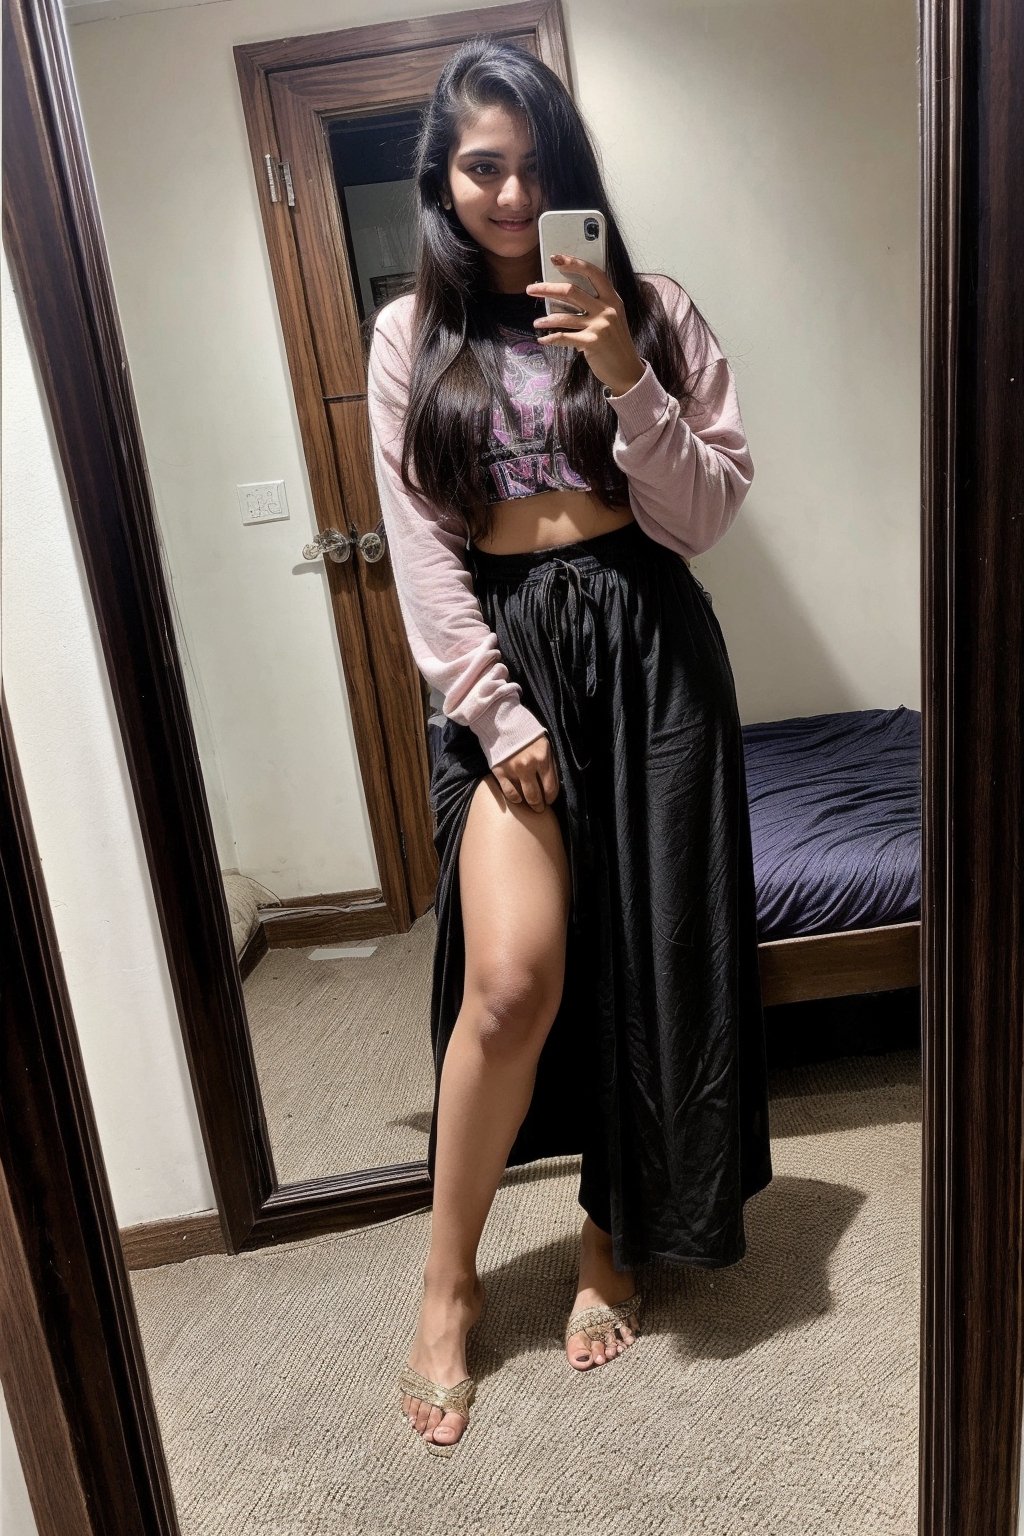 beautiful cute young attractive indian teenage girl, 18 years old, cute,  Instagram model, long black_hair, colorful hair, warm, at home, indian, mirror selfie, full body

